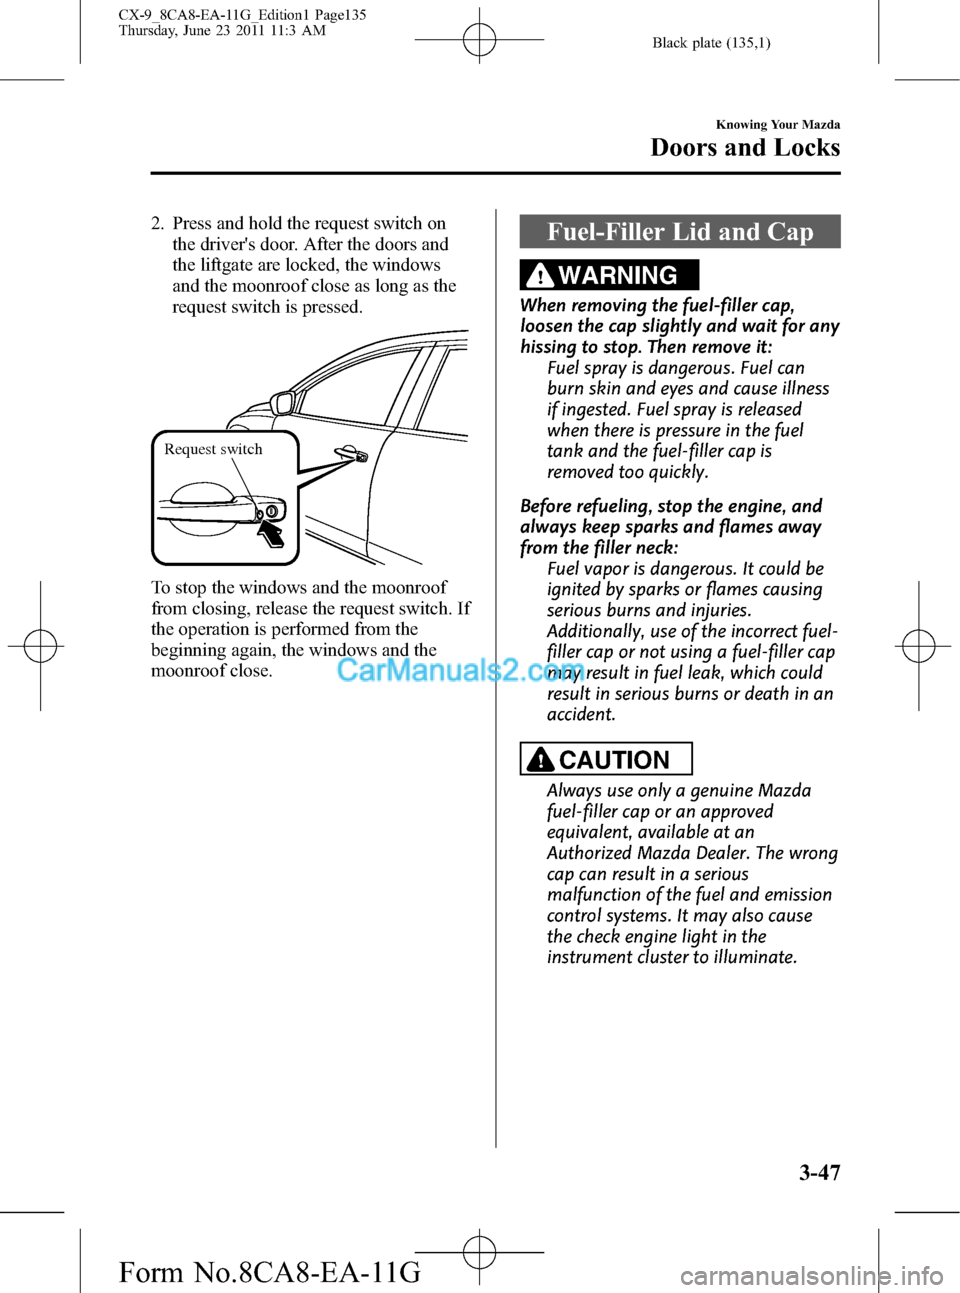 MAZDA MODEL CX-9 2012  Owners Manual (in English) Black plate (135,1)
2. Press and hold the request switch on
the drivers door. After the doors and
the liftgate are locked, the windows
and the moonroof close as long as the
request switch is pressed.